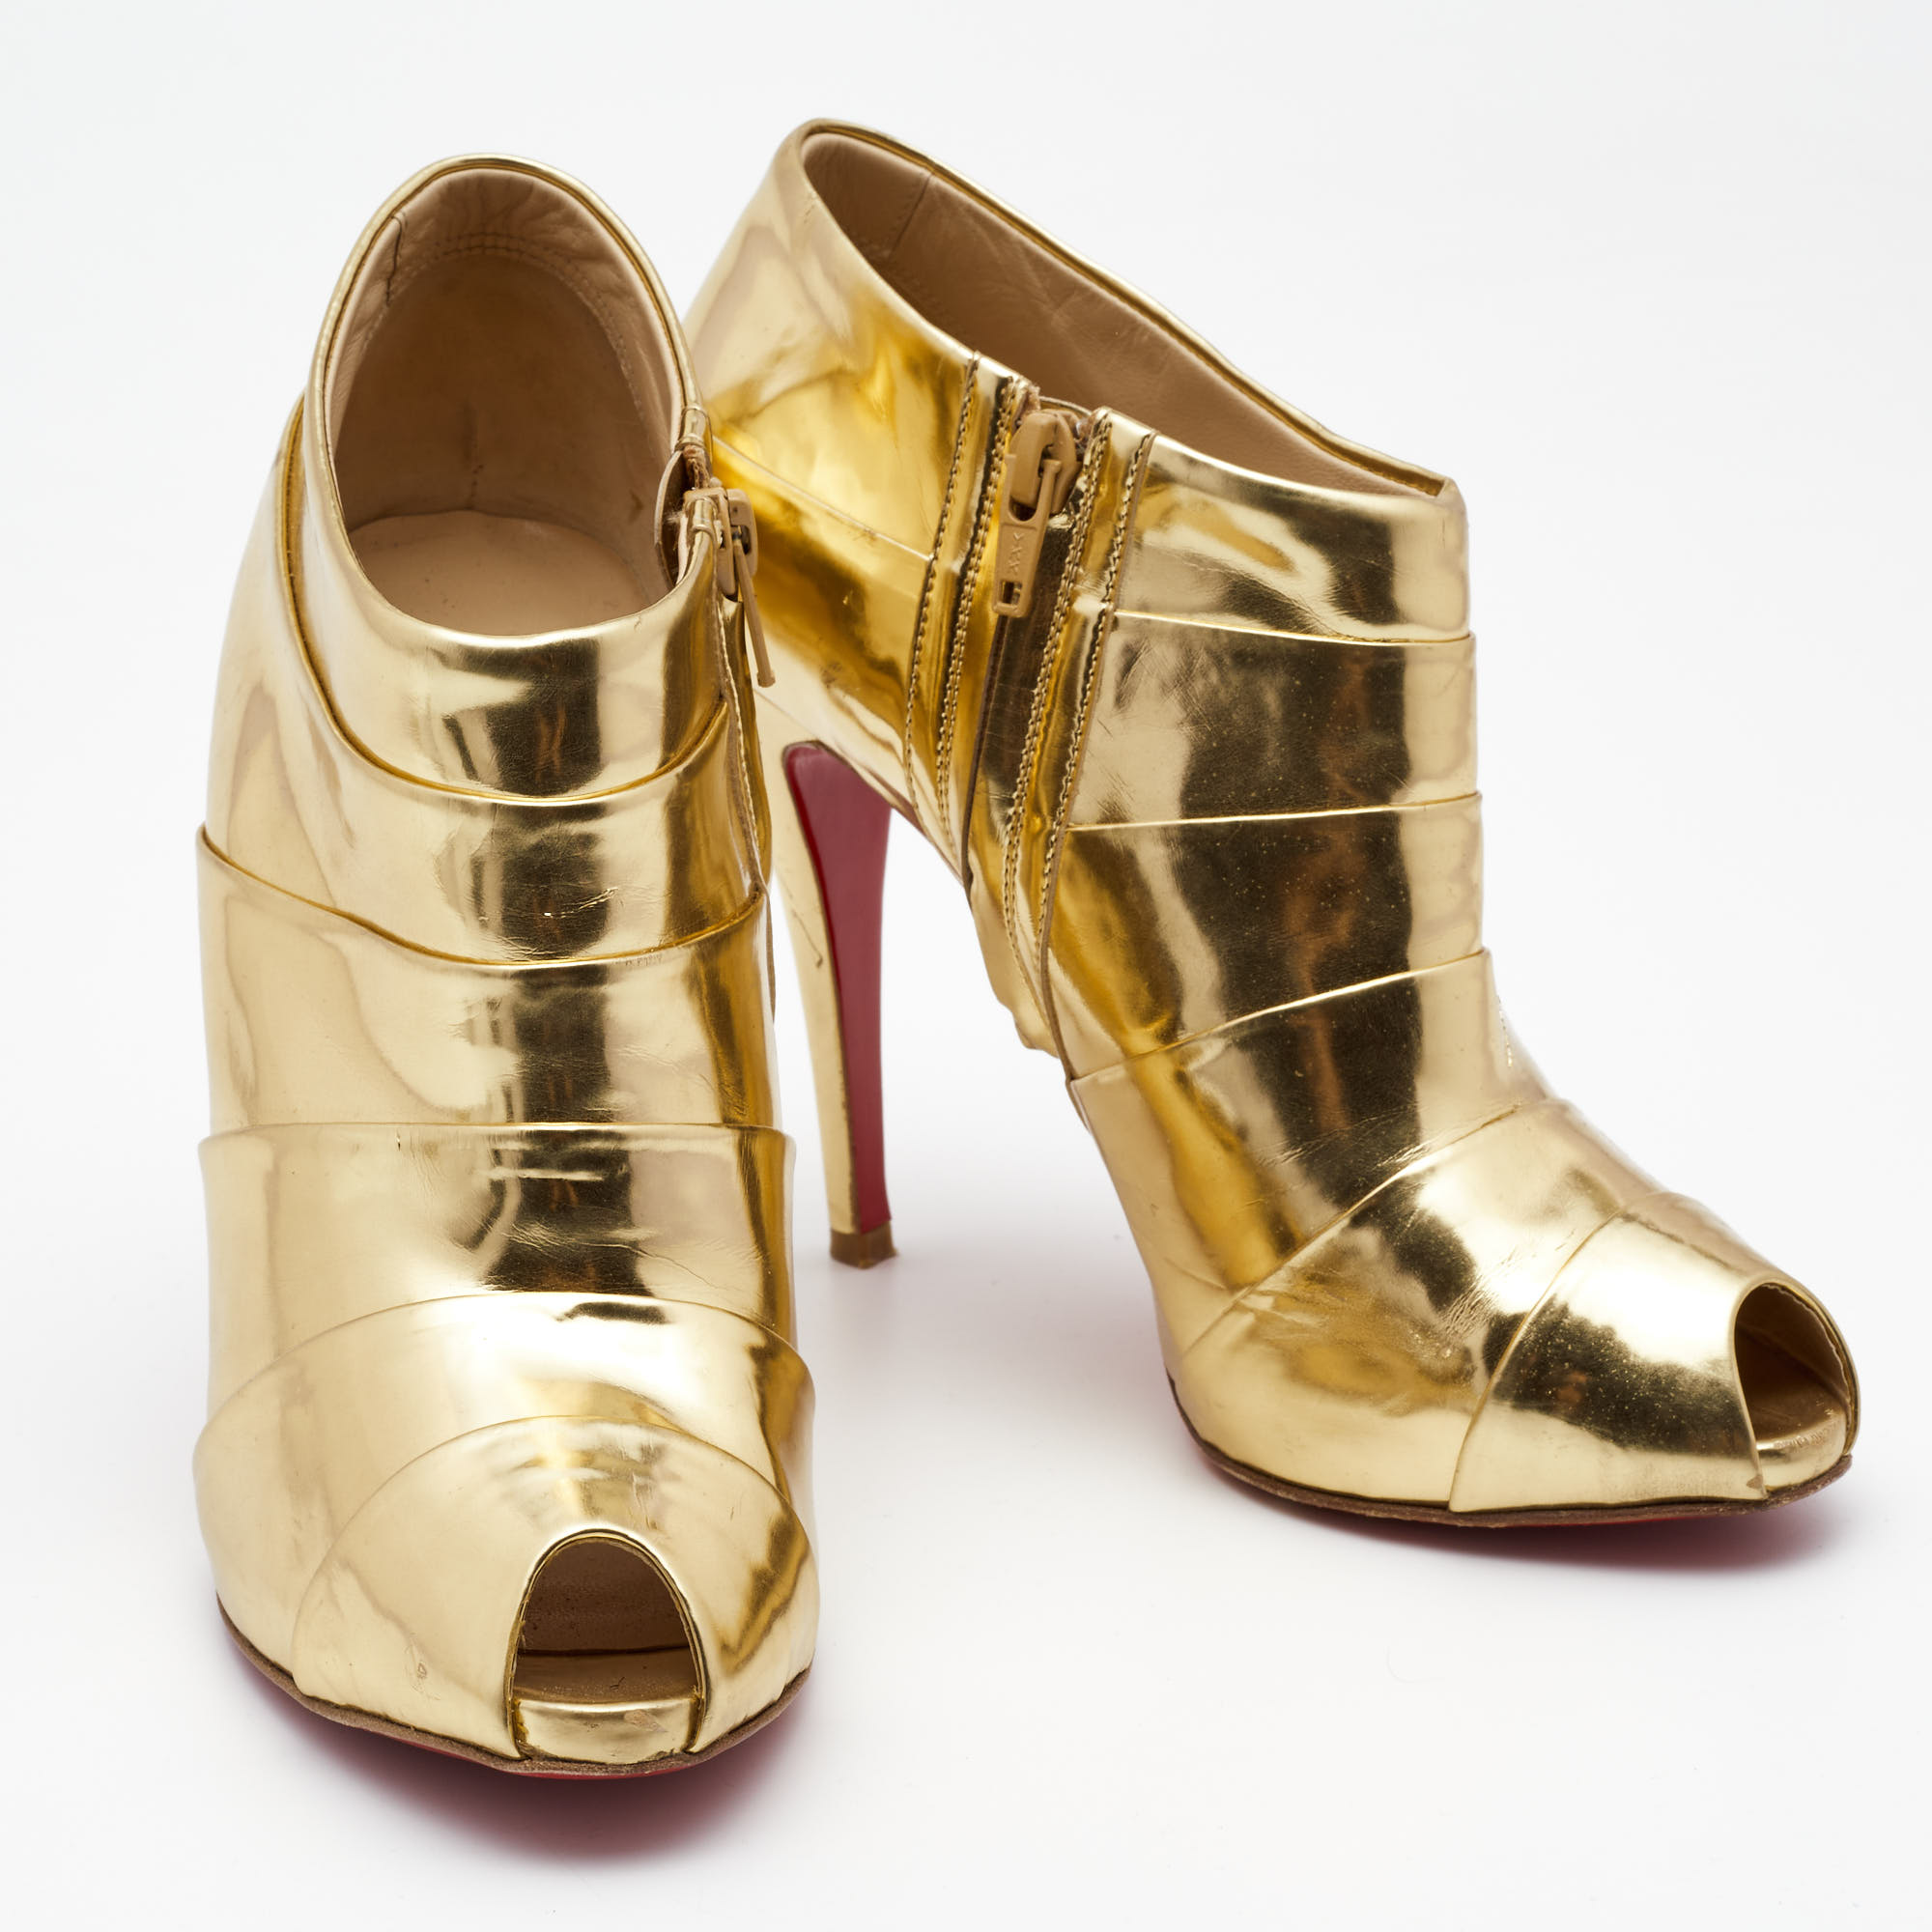 Christian Louboutin Gold Leather Robot Booties Size 39